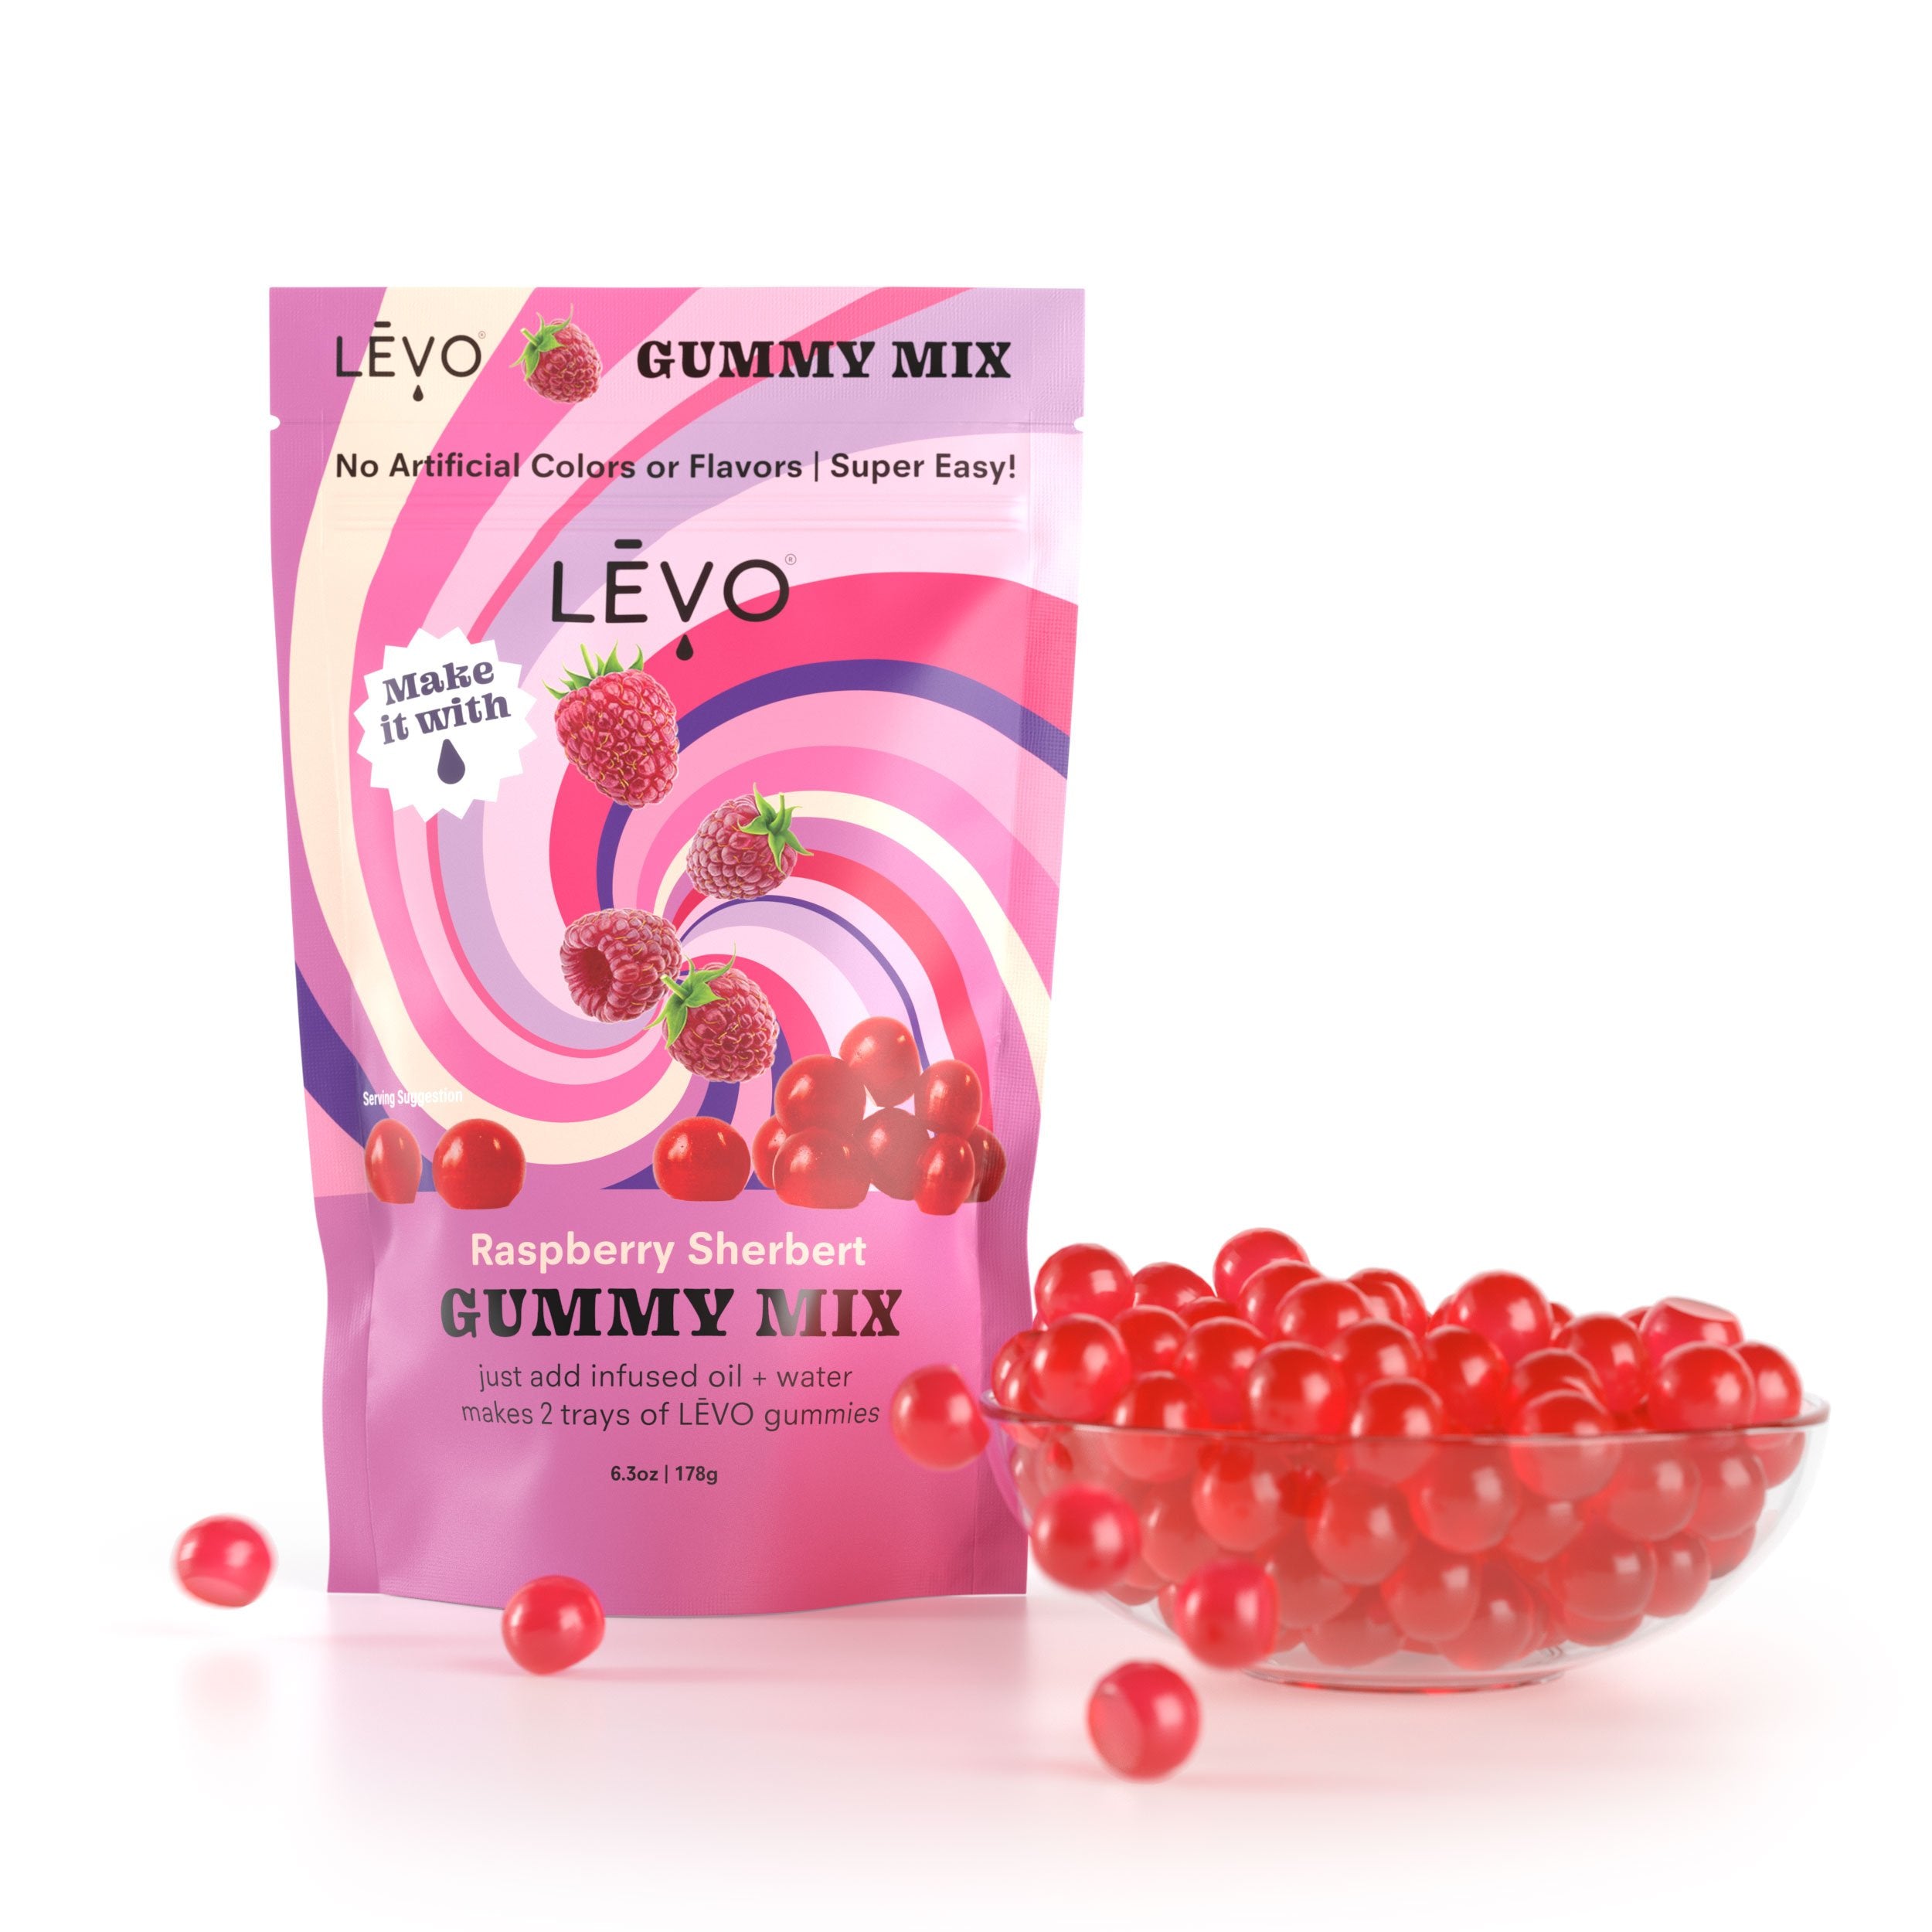 Looking for the easiest way to make infused gummy edible candies at home? Buy a LEVO powdered gummy mix, and just add water and infused oil. Save hundreds of dollars by making your own gummies at home.